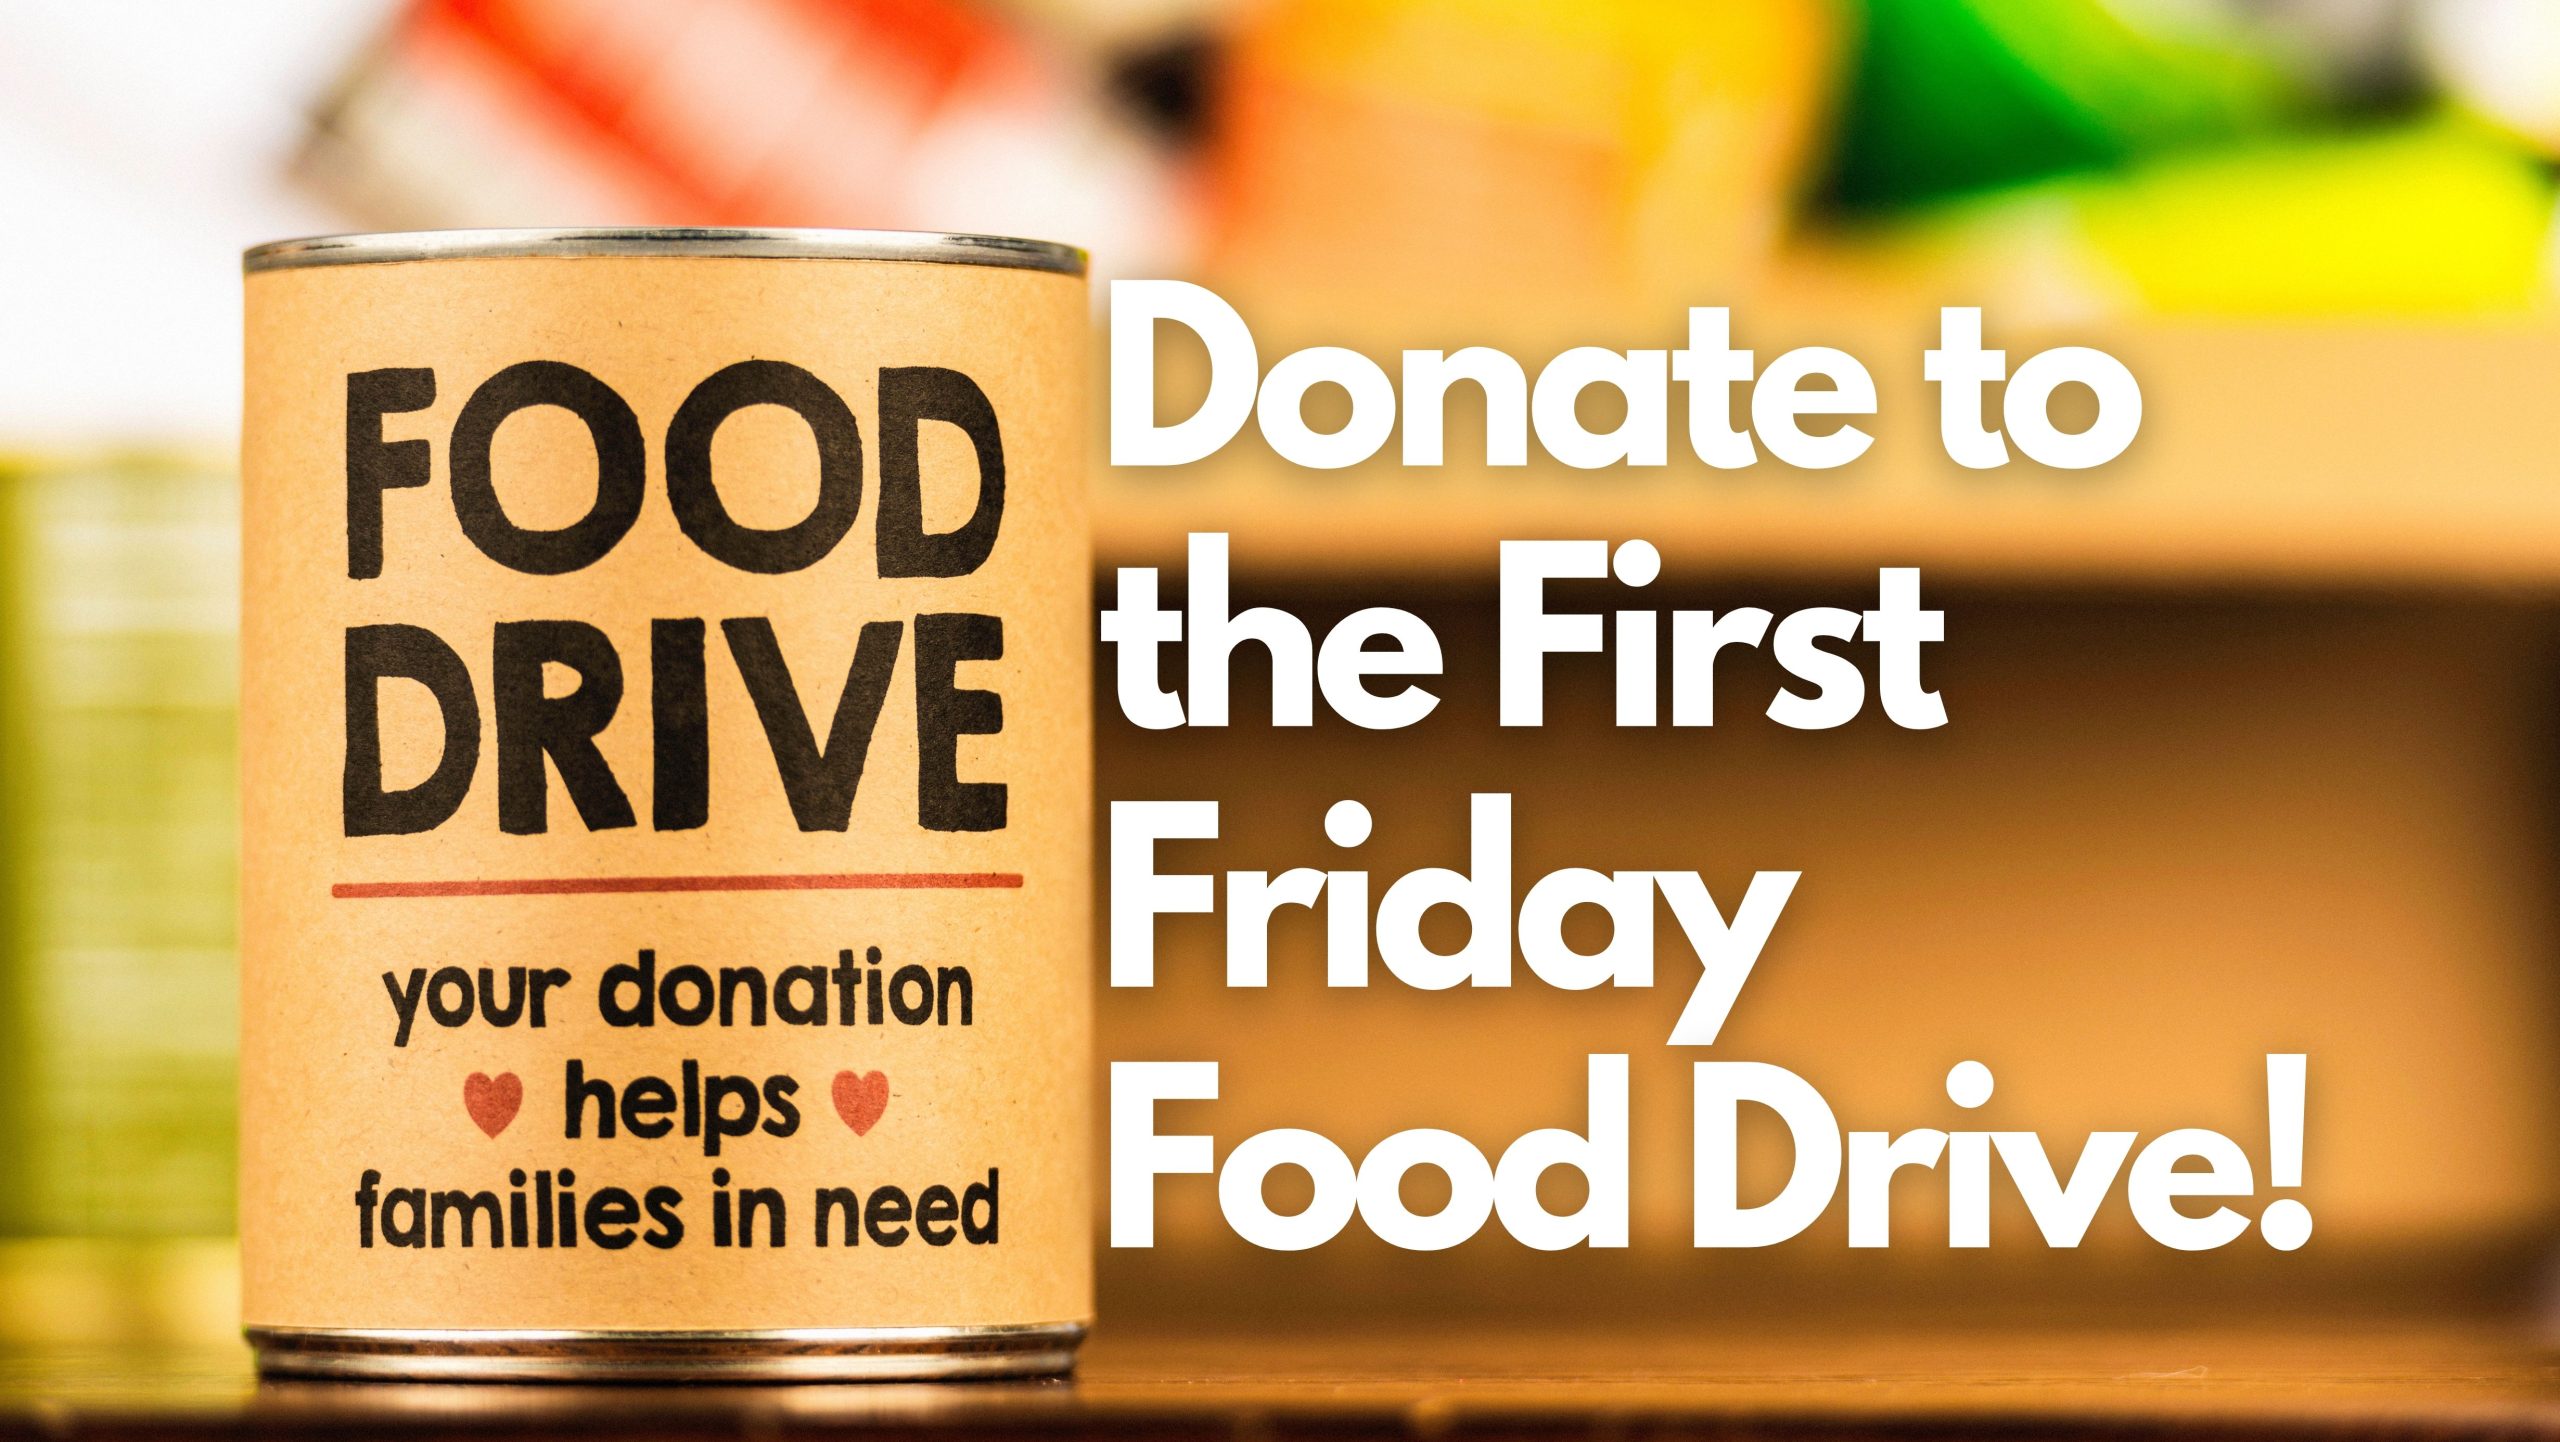 First Friday Food Drive